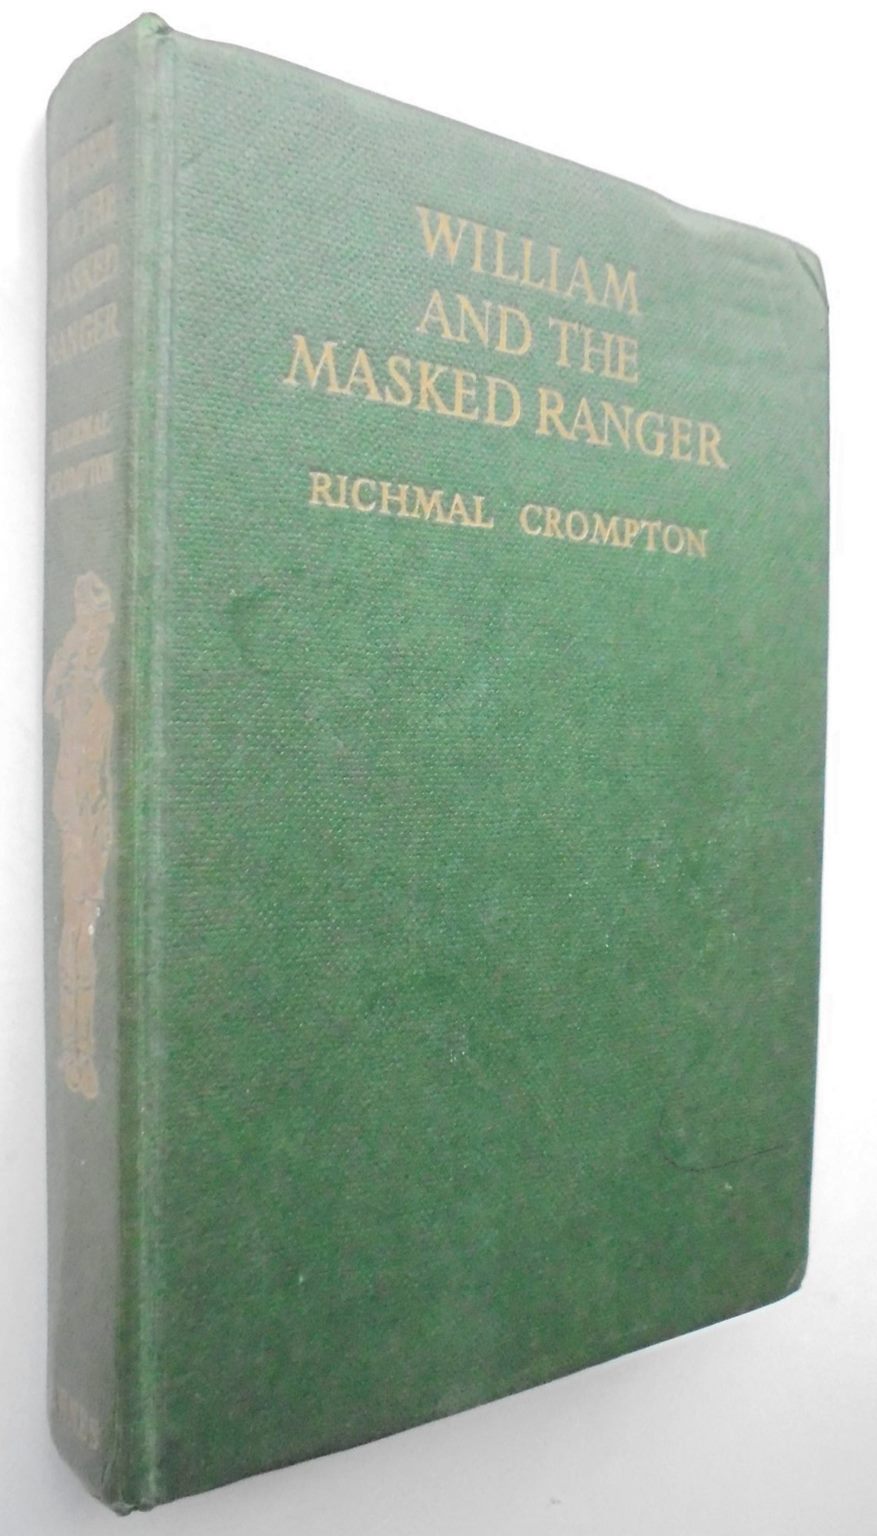 William And The Masked Ranger by Richmal Crompton.